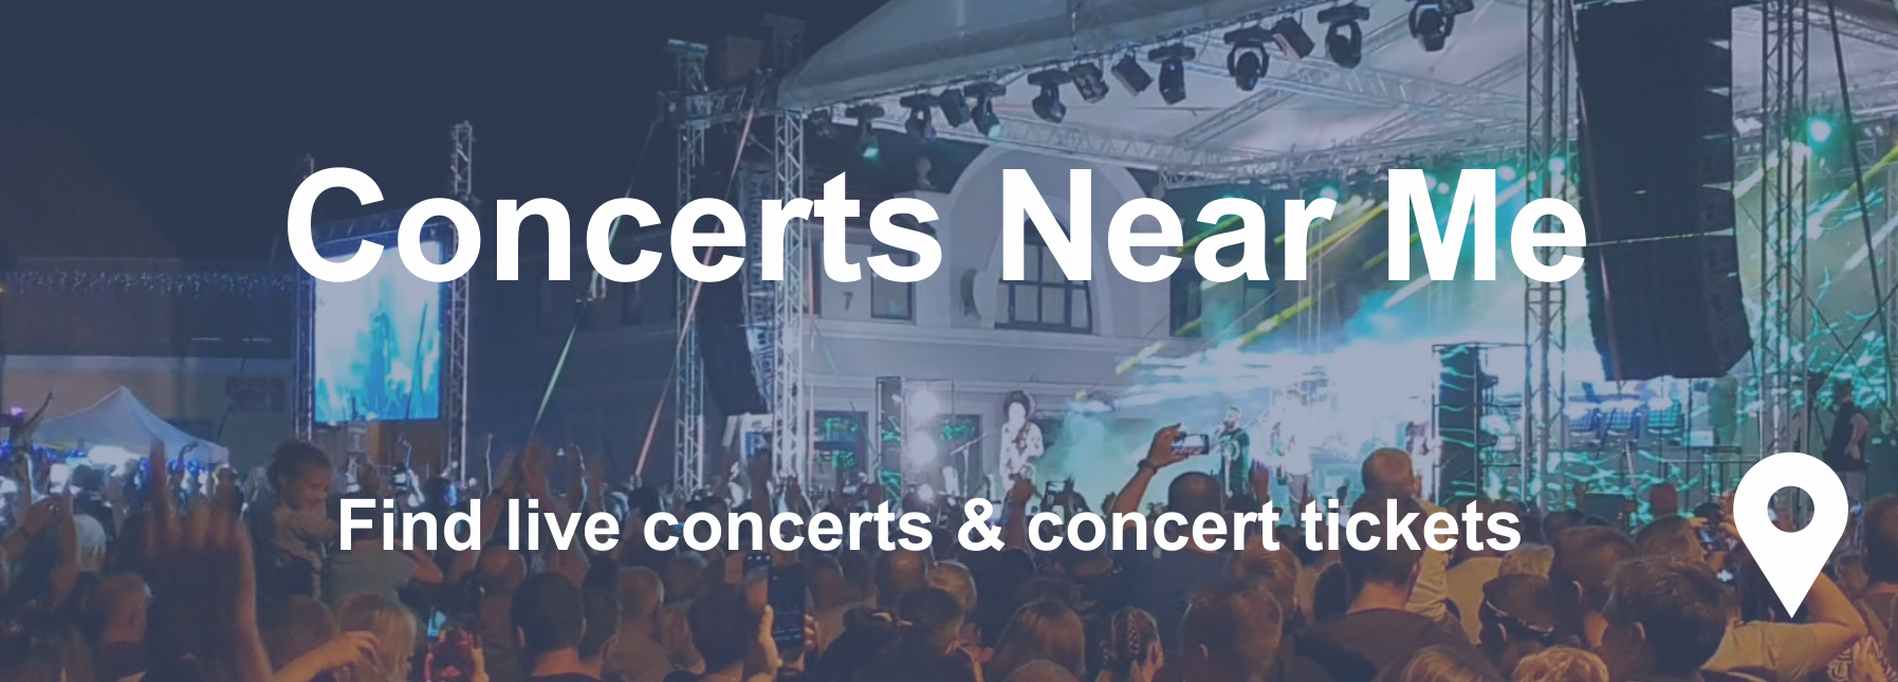 Concerts near me